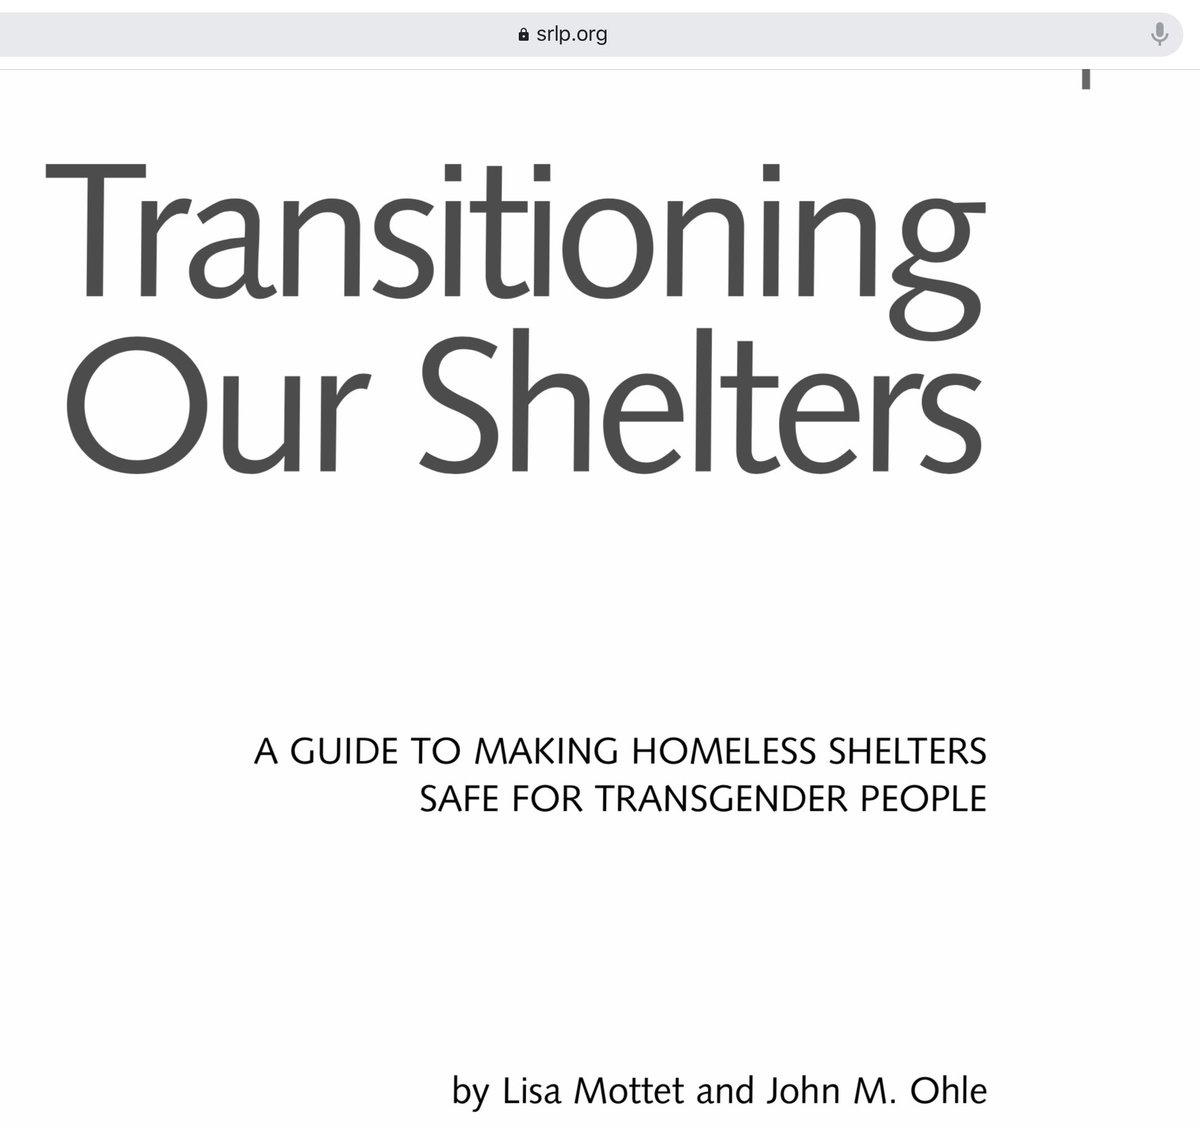 An influential report on adopting gender identity in shelter policy was the 2003 publication, “Transitioning Our Shelters,” by the National Gay and Lesbian Task Force, now known as the Task Force. The report is hosted by the Sylvia Rivera Law Project. https://srlp.org/wp-content/uploads/2012/08/TransitioningOurShelters.pdf